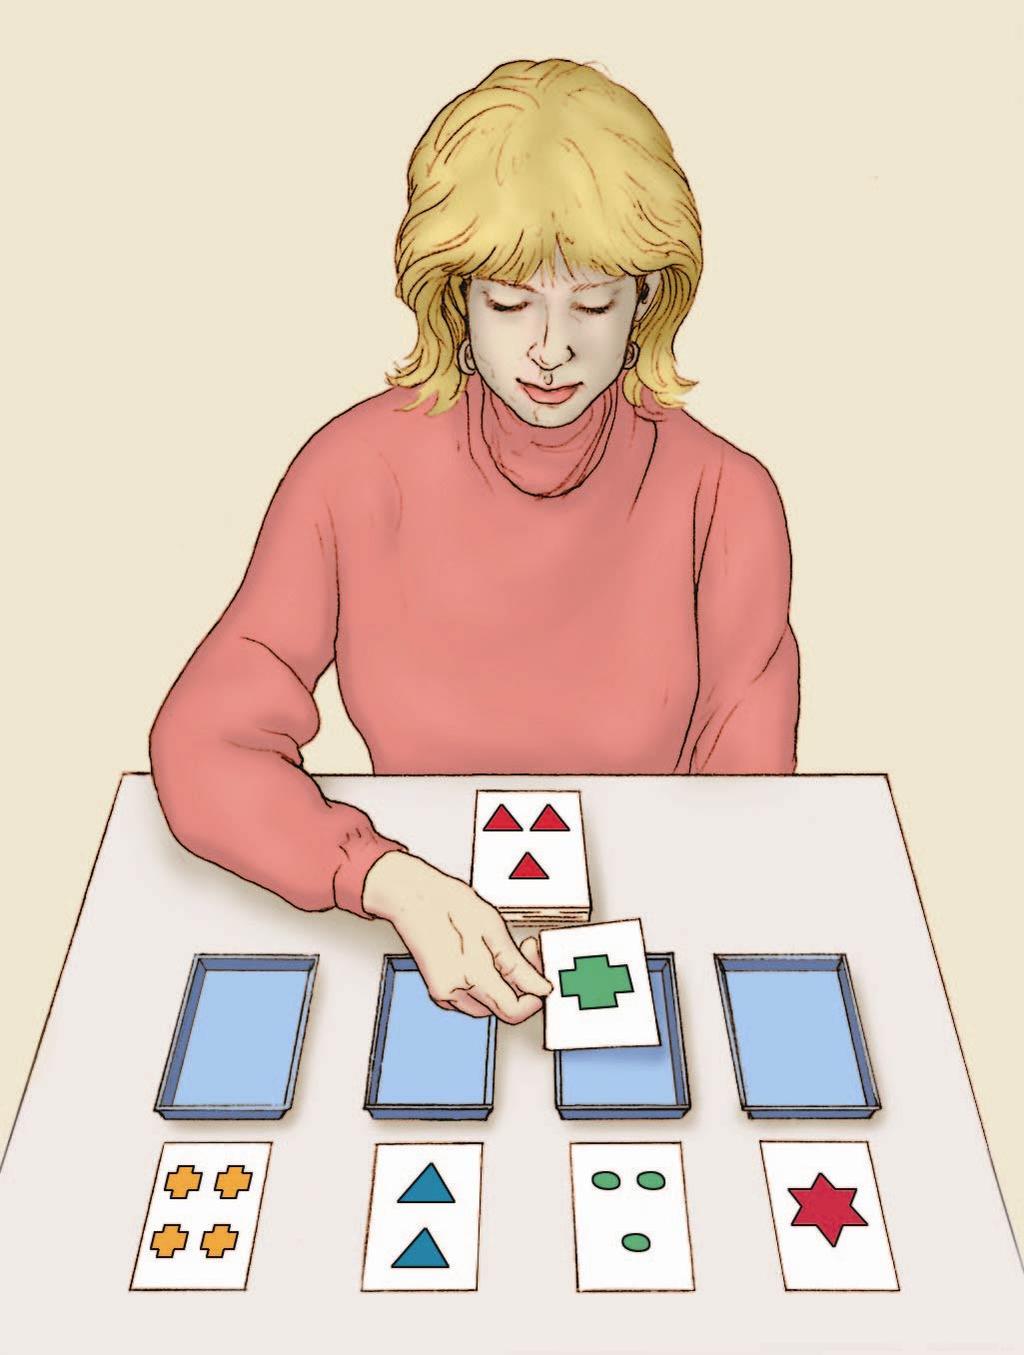 Wisconsin Card Sorting Test (WCST) A test